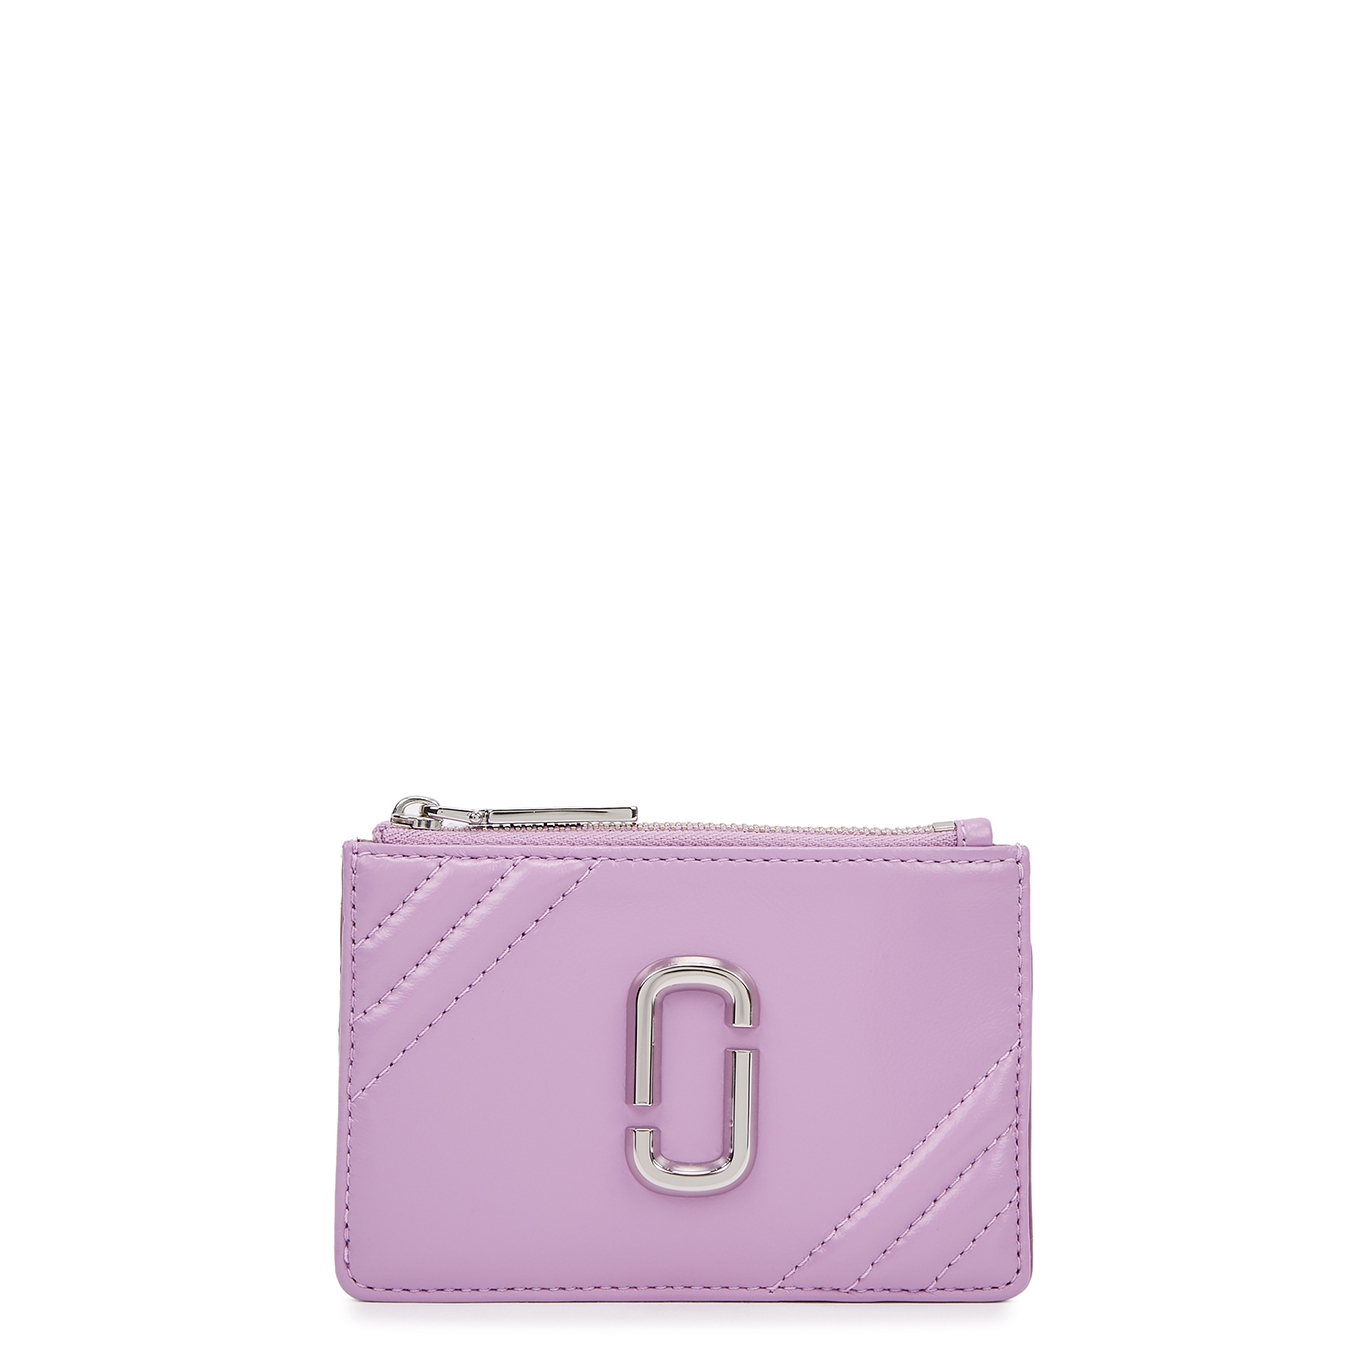 Marc Jacobs Glam Shot Lilac Quilted Leather Wallet - Purple - One Size